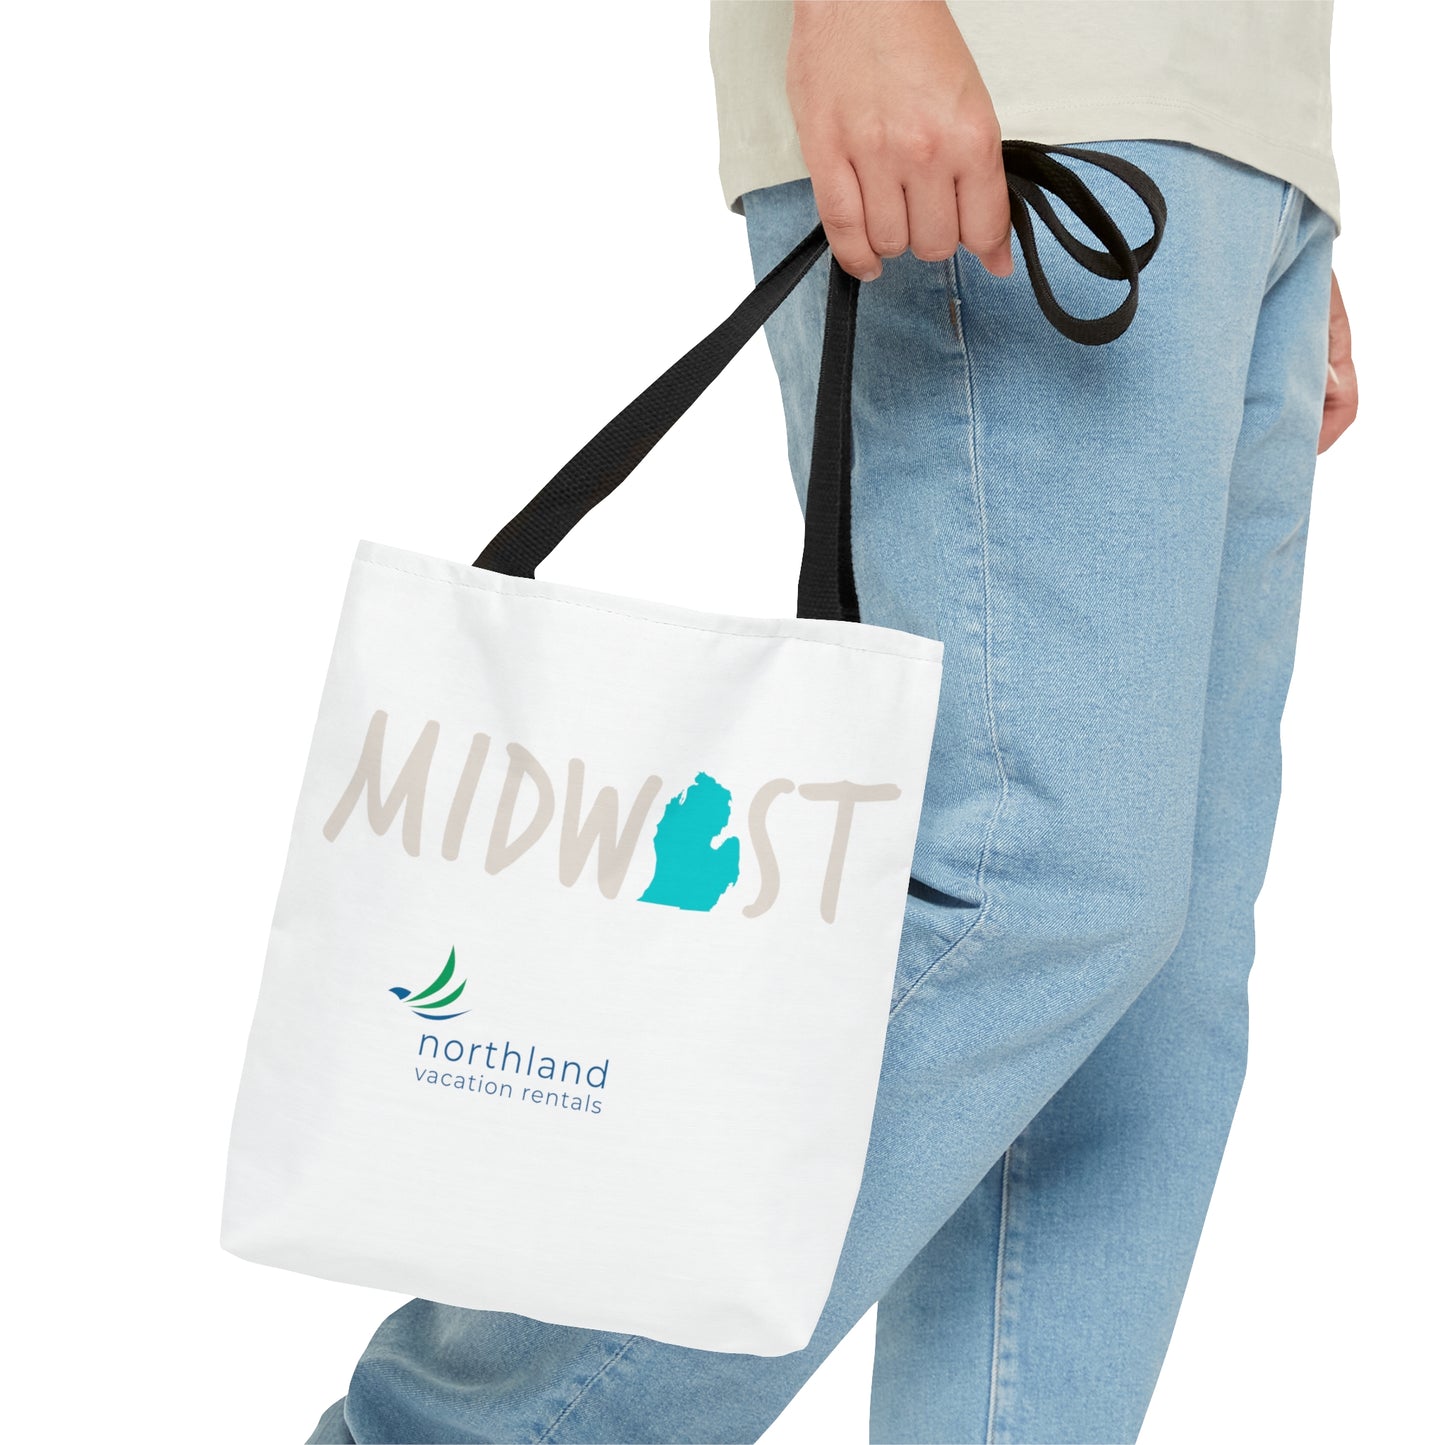 Michigan Midwest 'Look Sharp' Tote/Northland VR